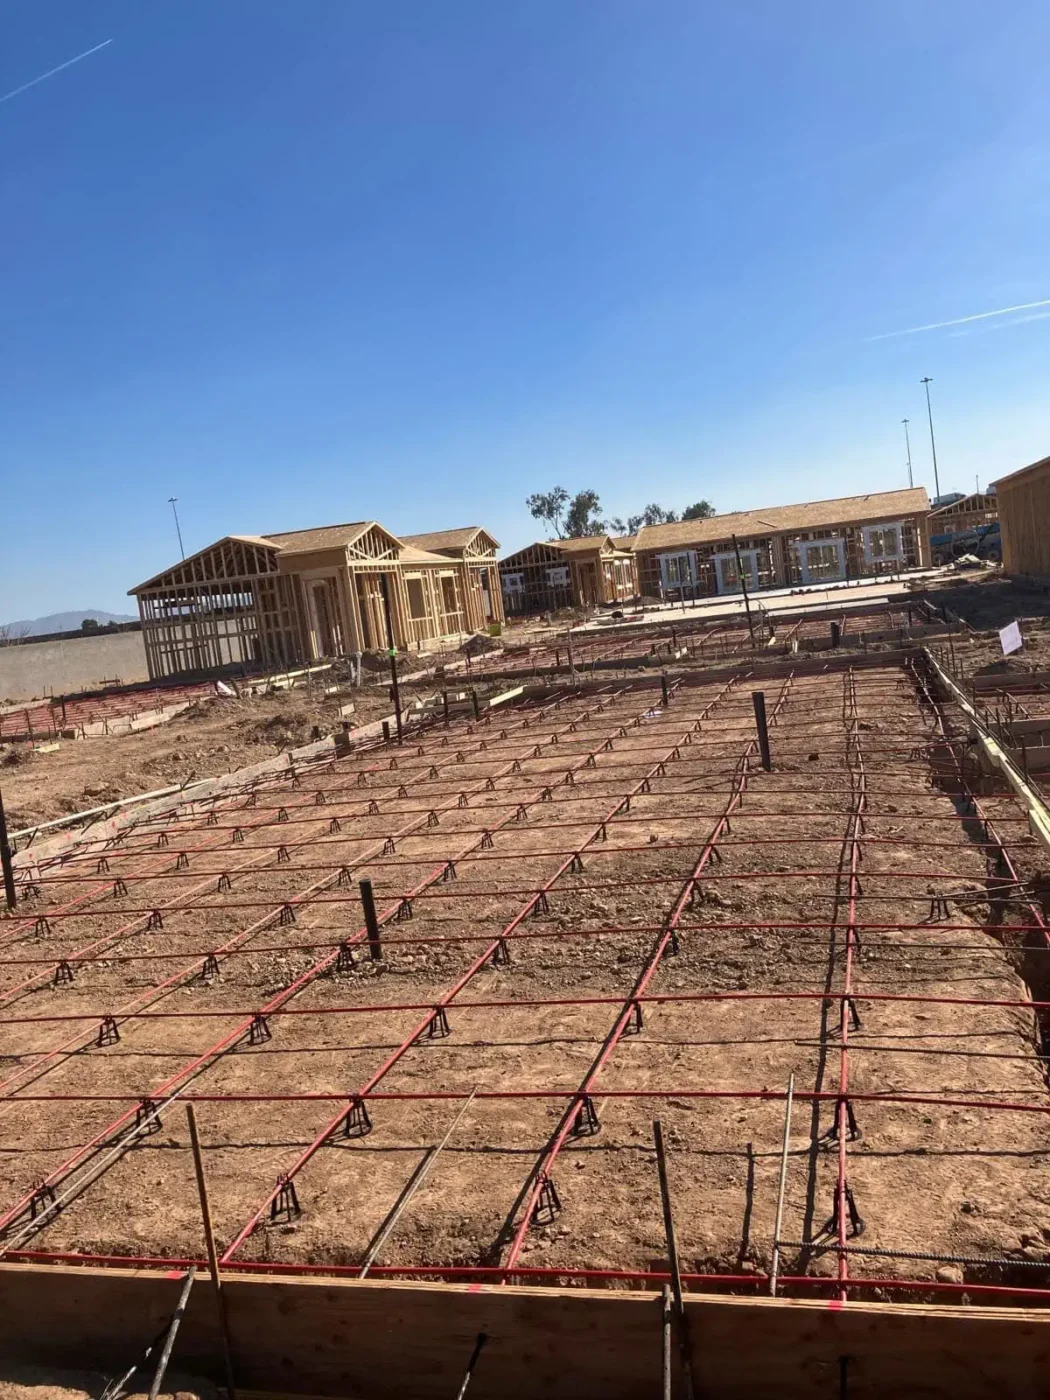 concrete foundations dug and reinforced, ready for a concrete pour. At a site of a retirement village in Albuquerque NM